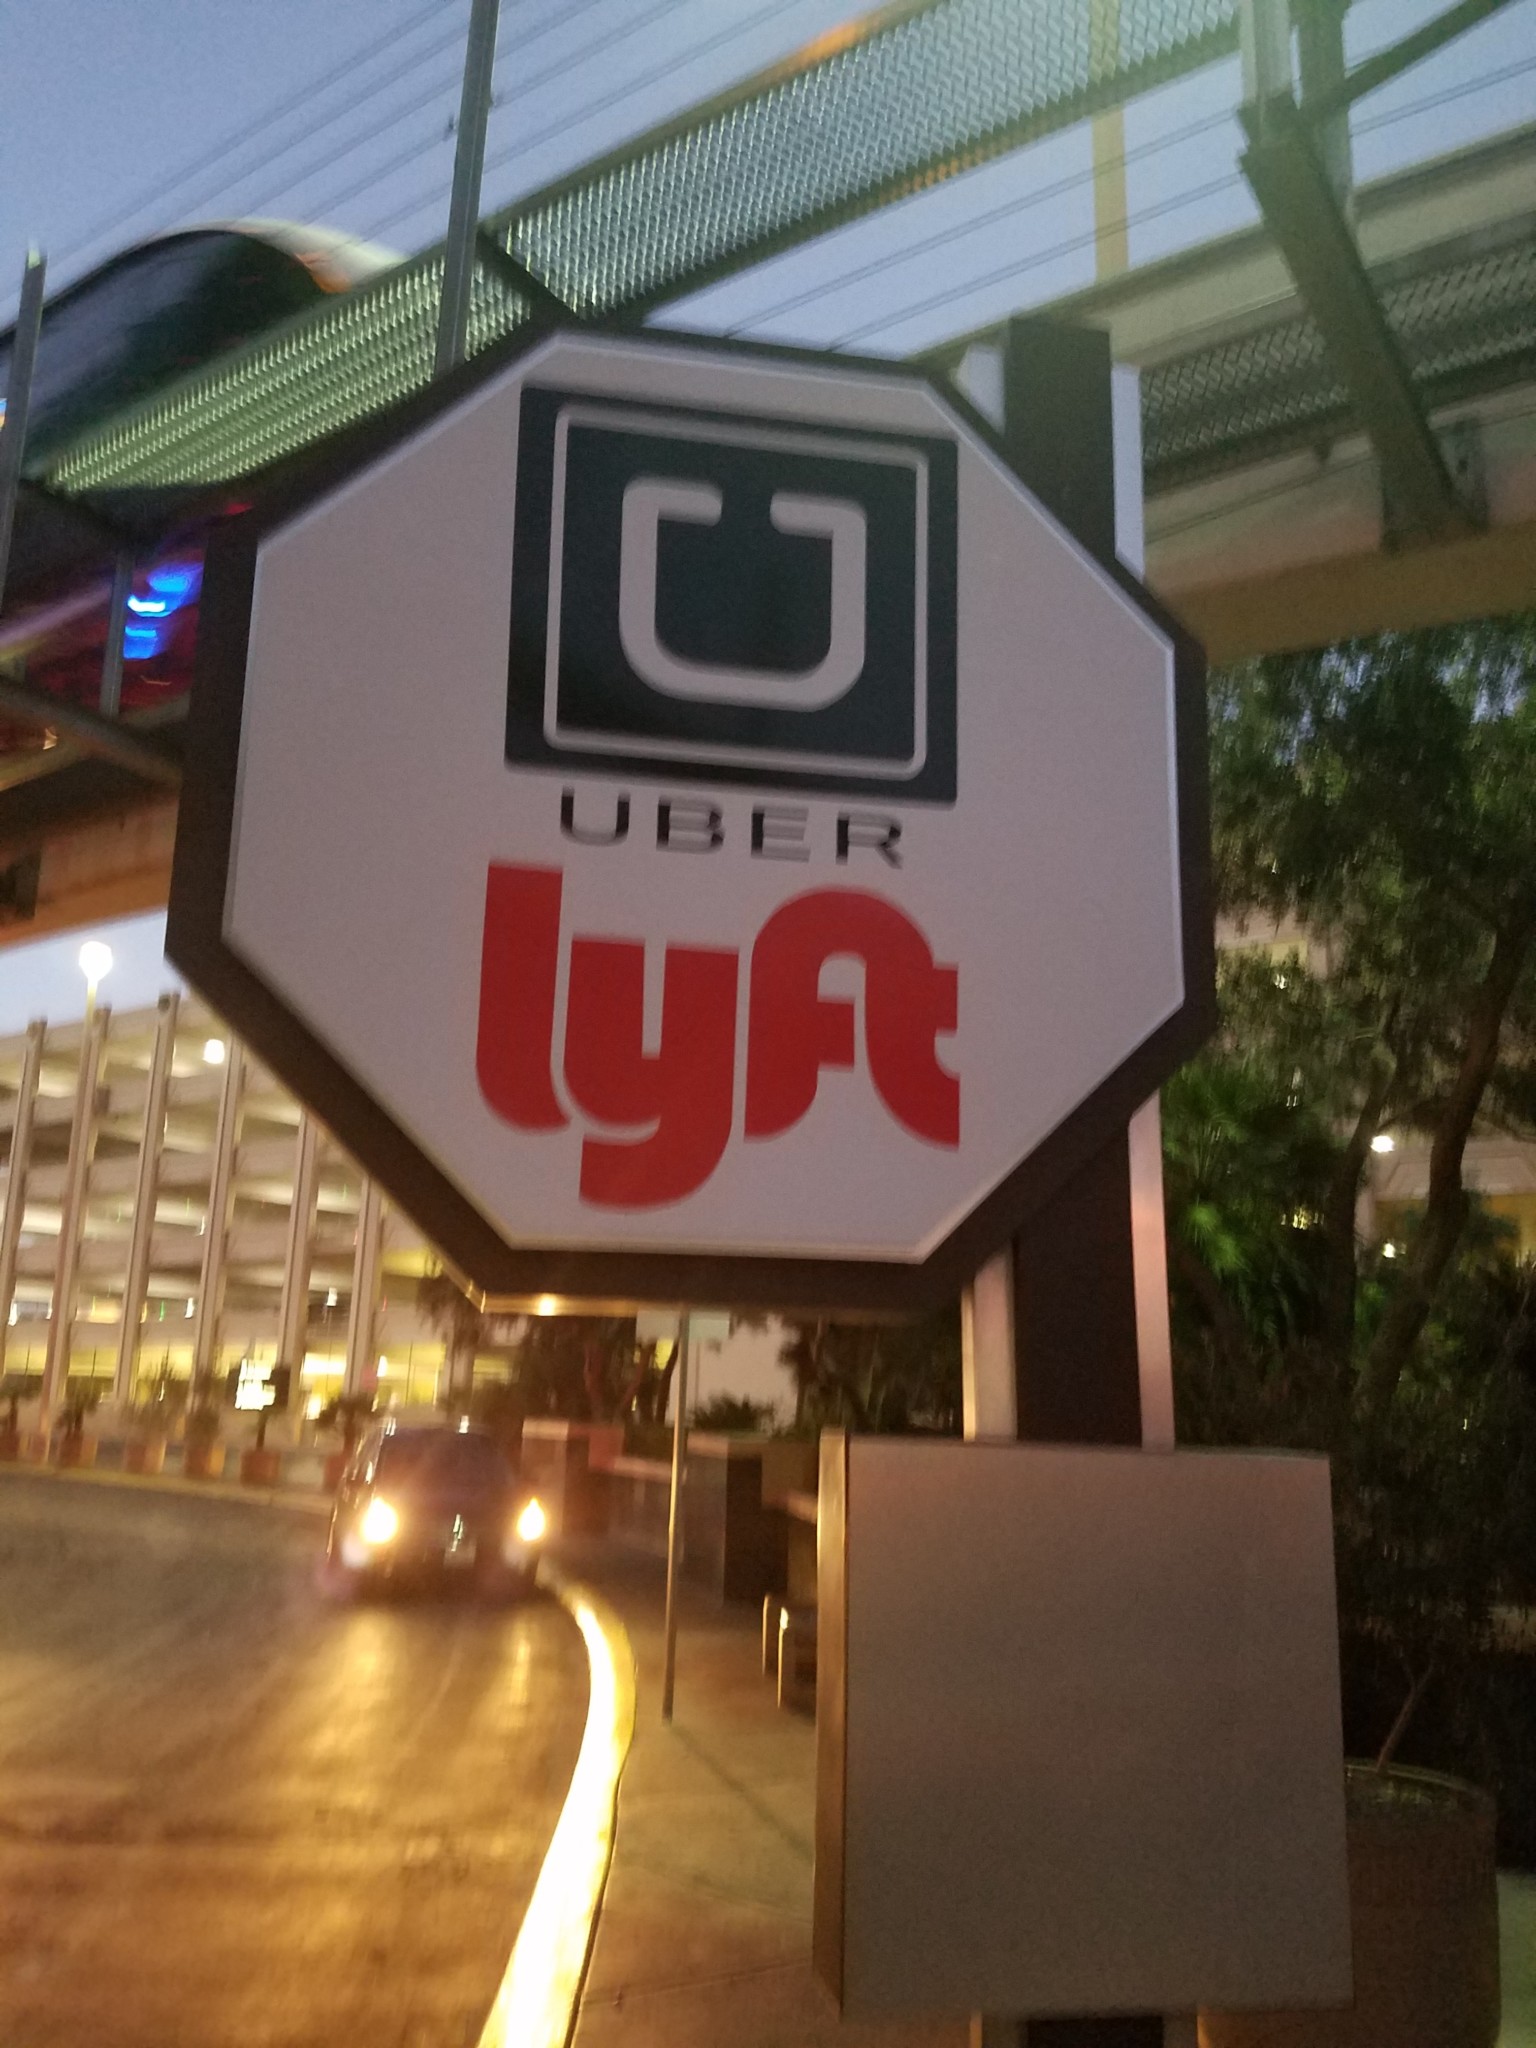 I used Uber/Lyft when I could find the pick up spots. 